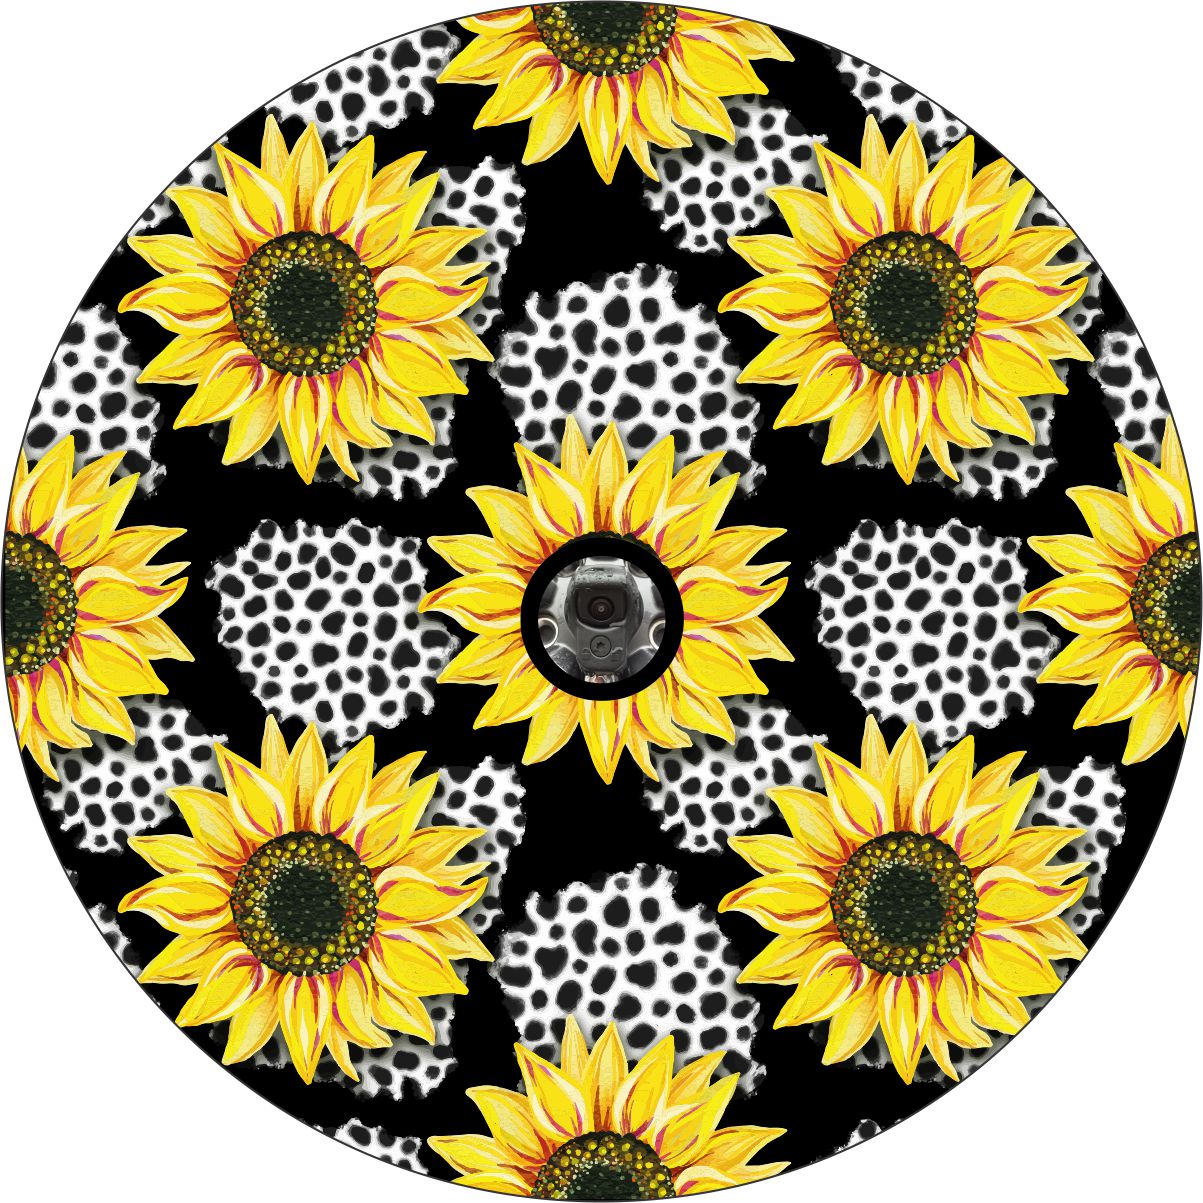 Black vinyl spare tire cover design with sunflower and leopard print plus a back up camera hole space